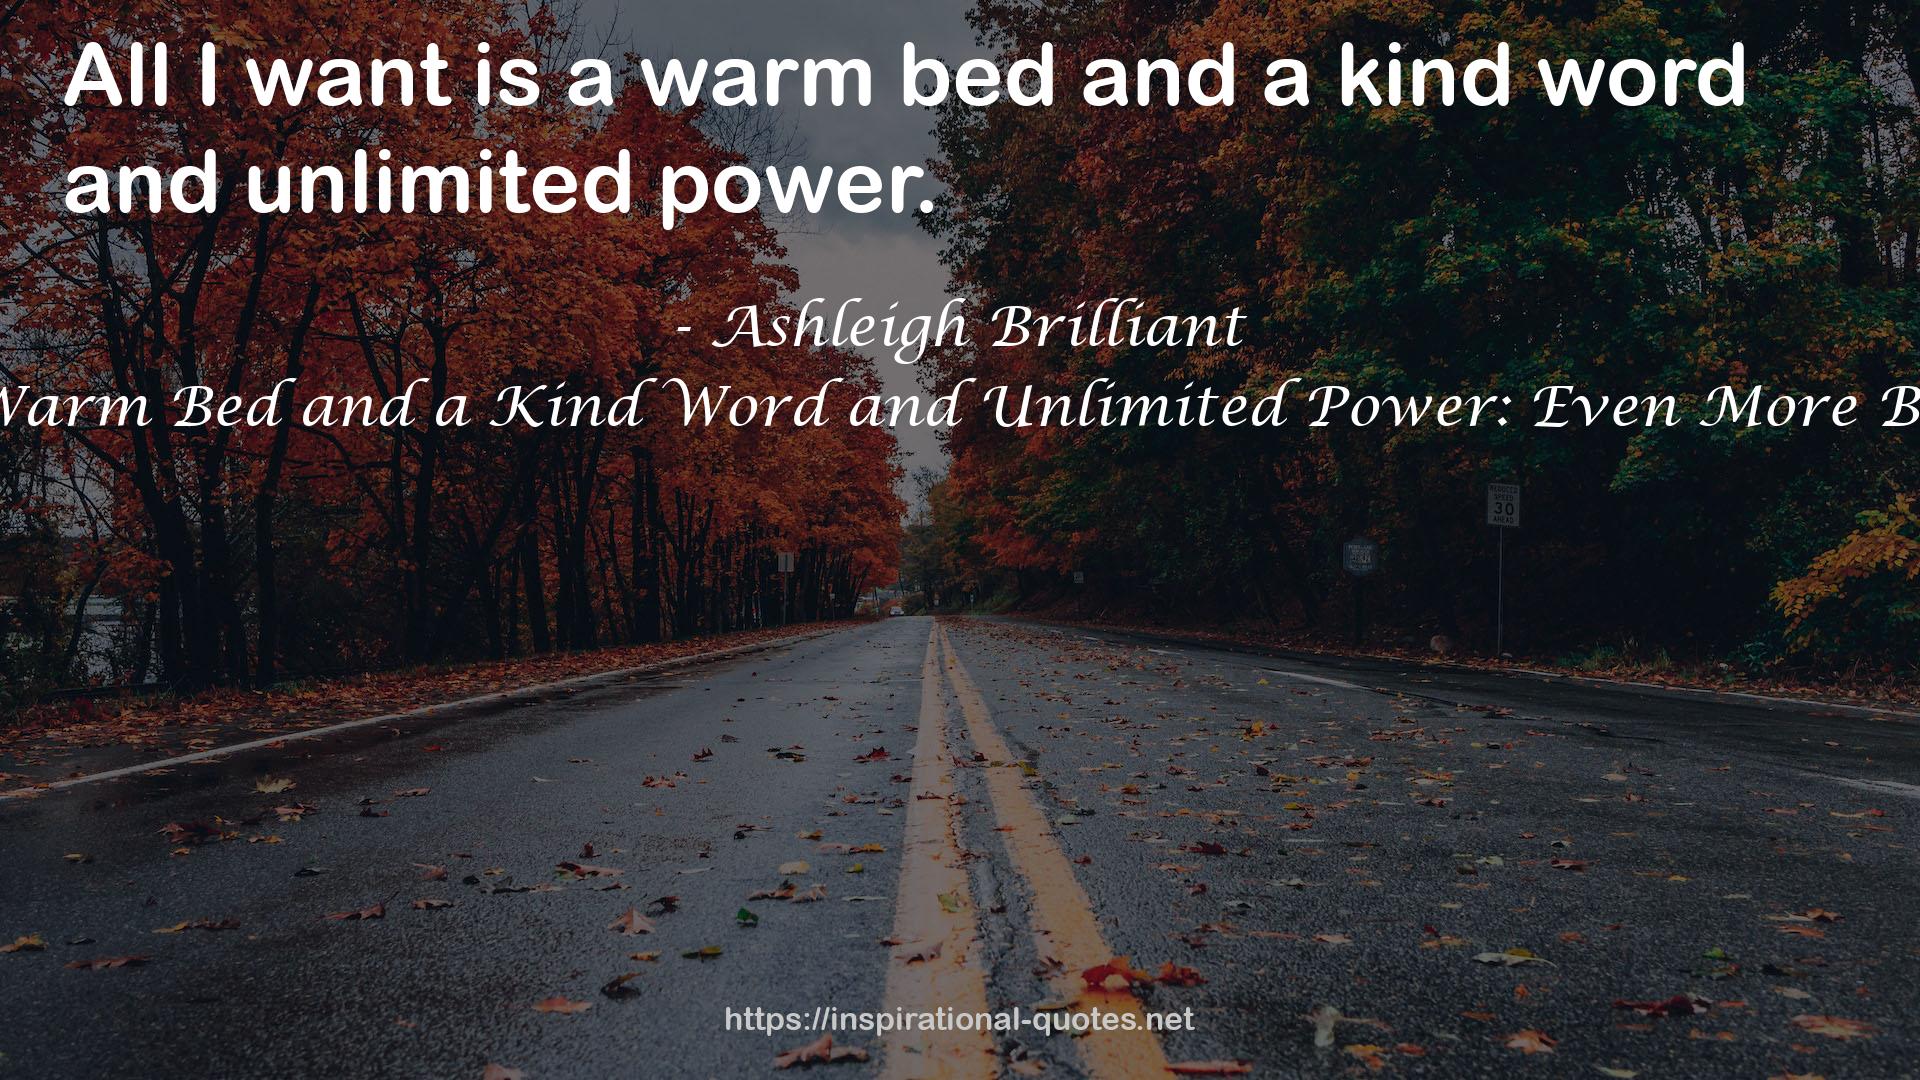 All I Want is a Warm Bed and a Kind Word and Unlimited Power: Even More Brilliant Thoughts QUOTES